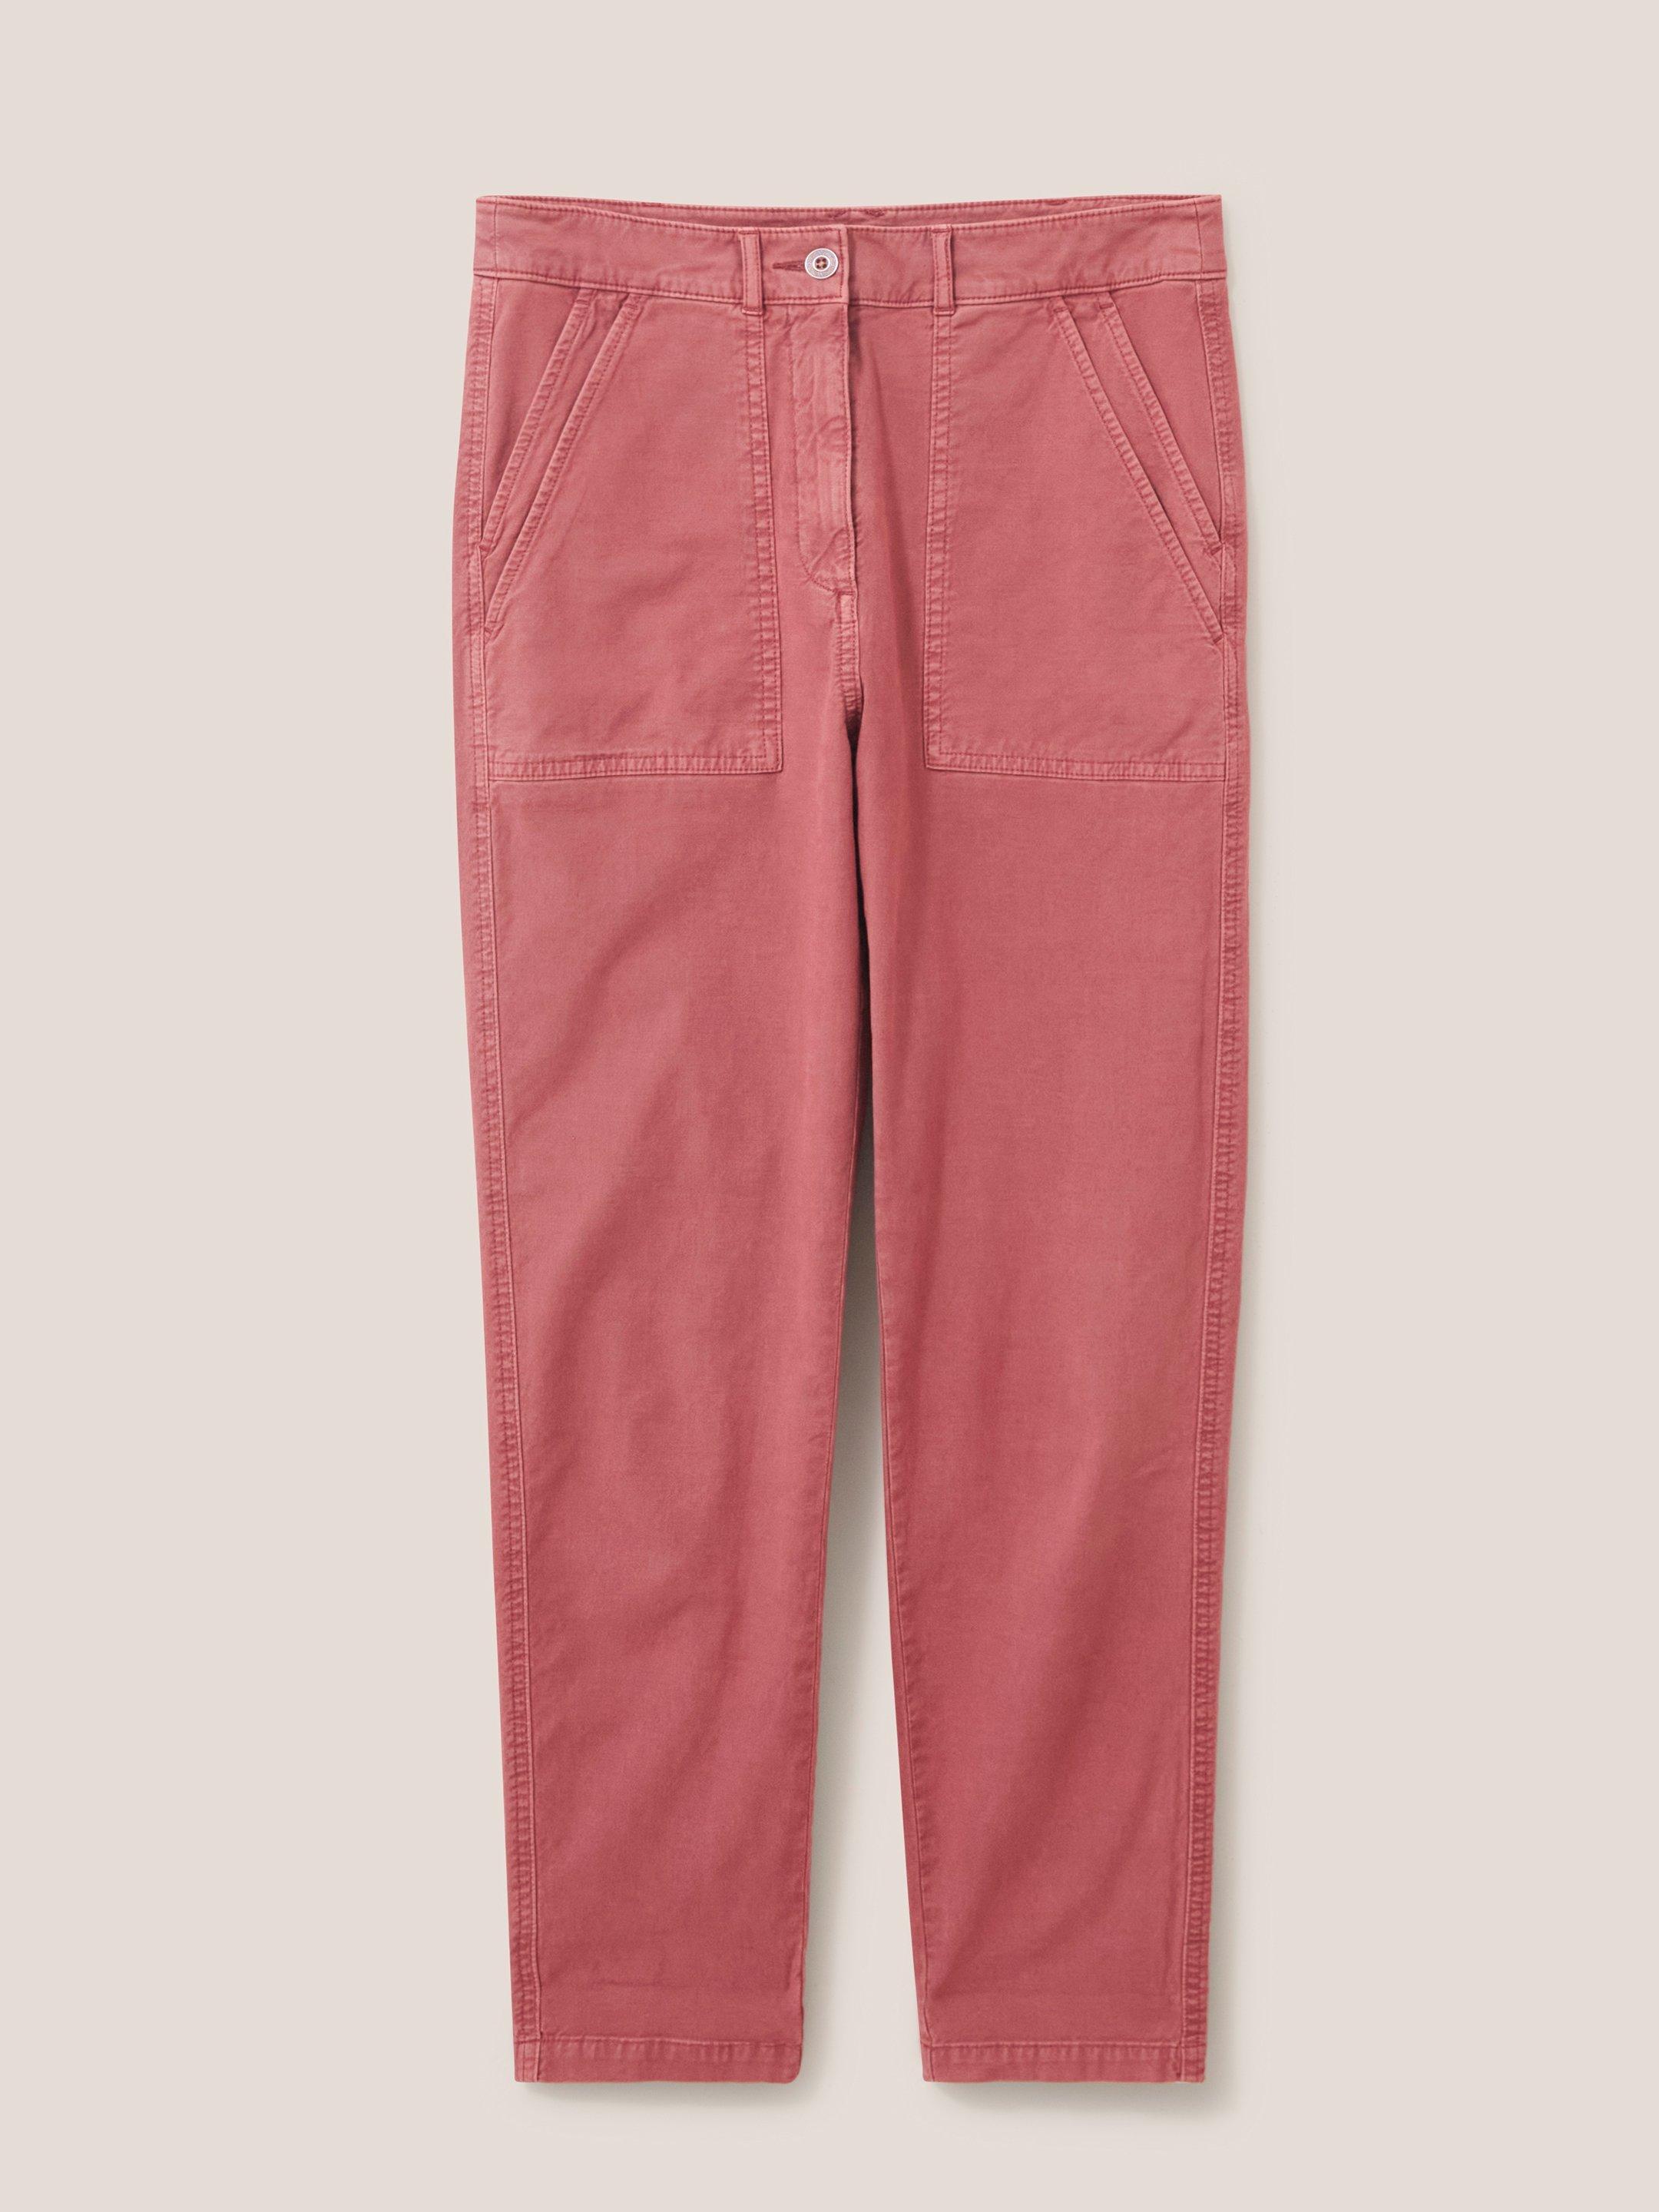 Twister Chino in MID PLUM - FLAT FRONT